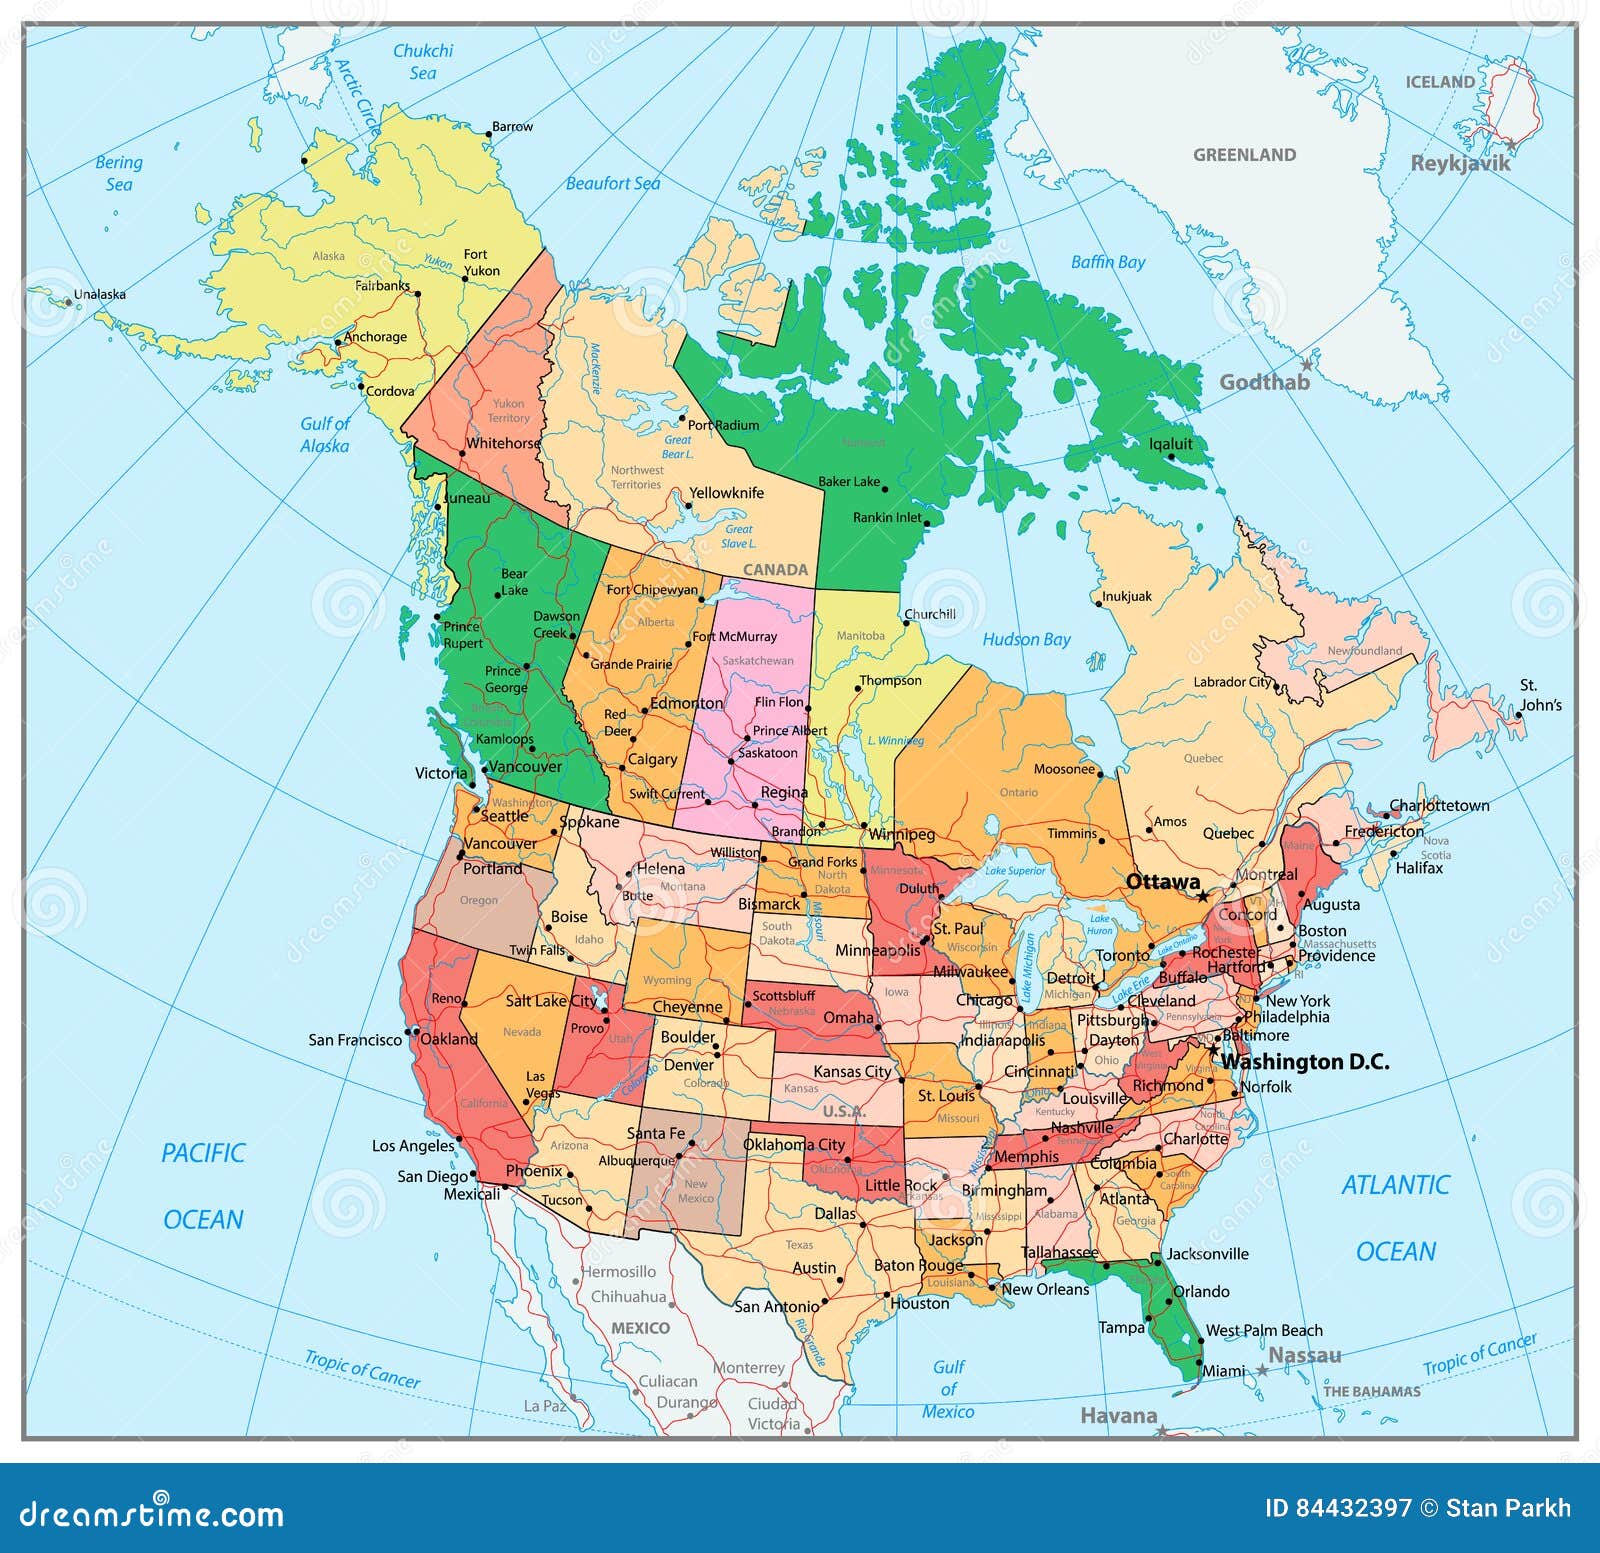 us canada map with states Usa And Canada Large Detailed Political Map With States Provinces us canada map with states